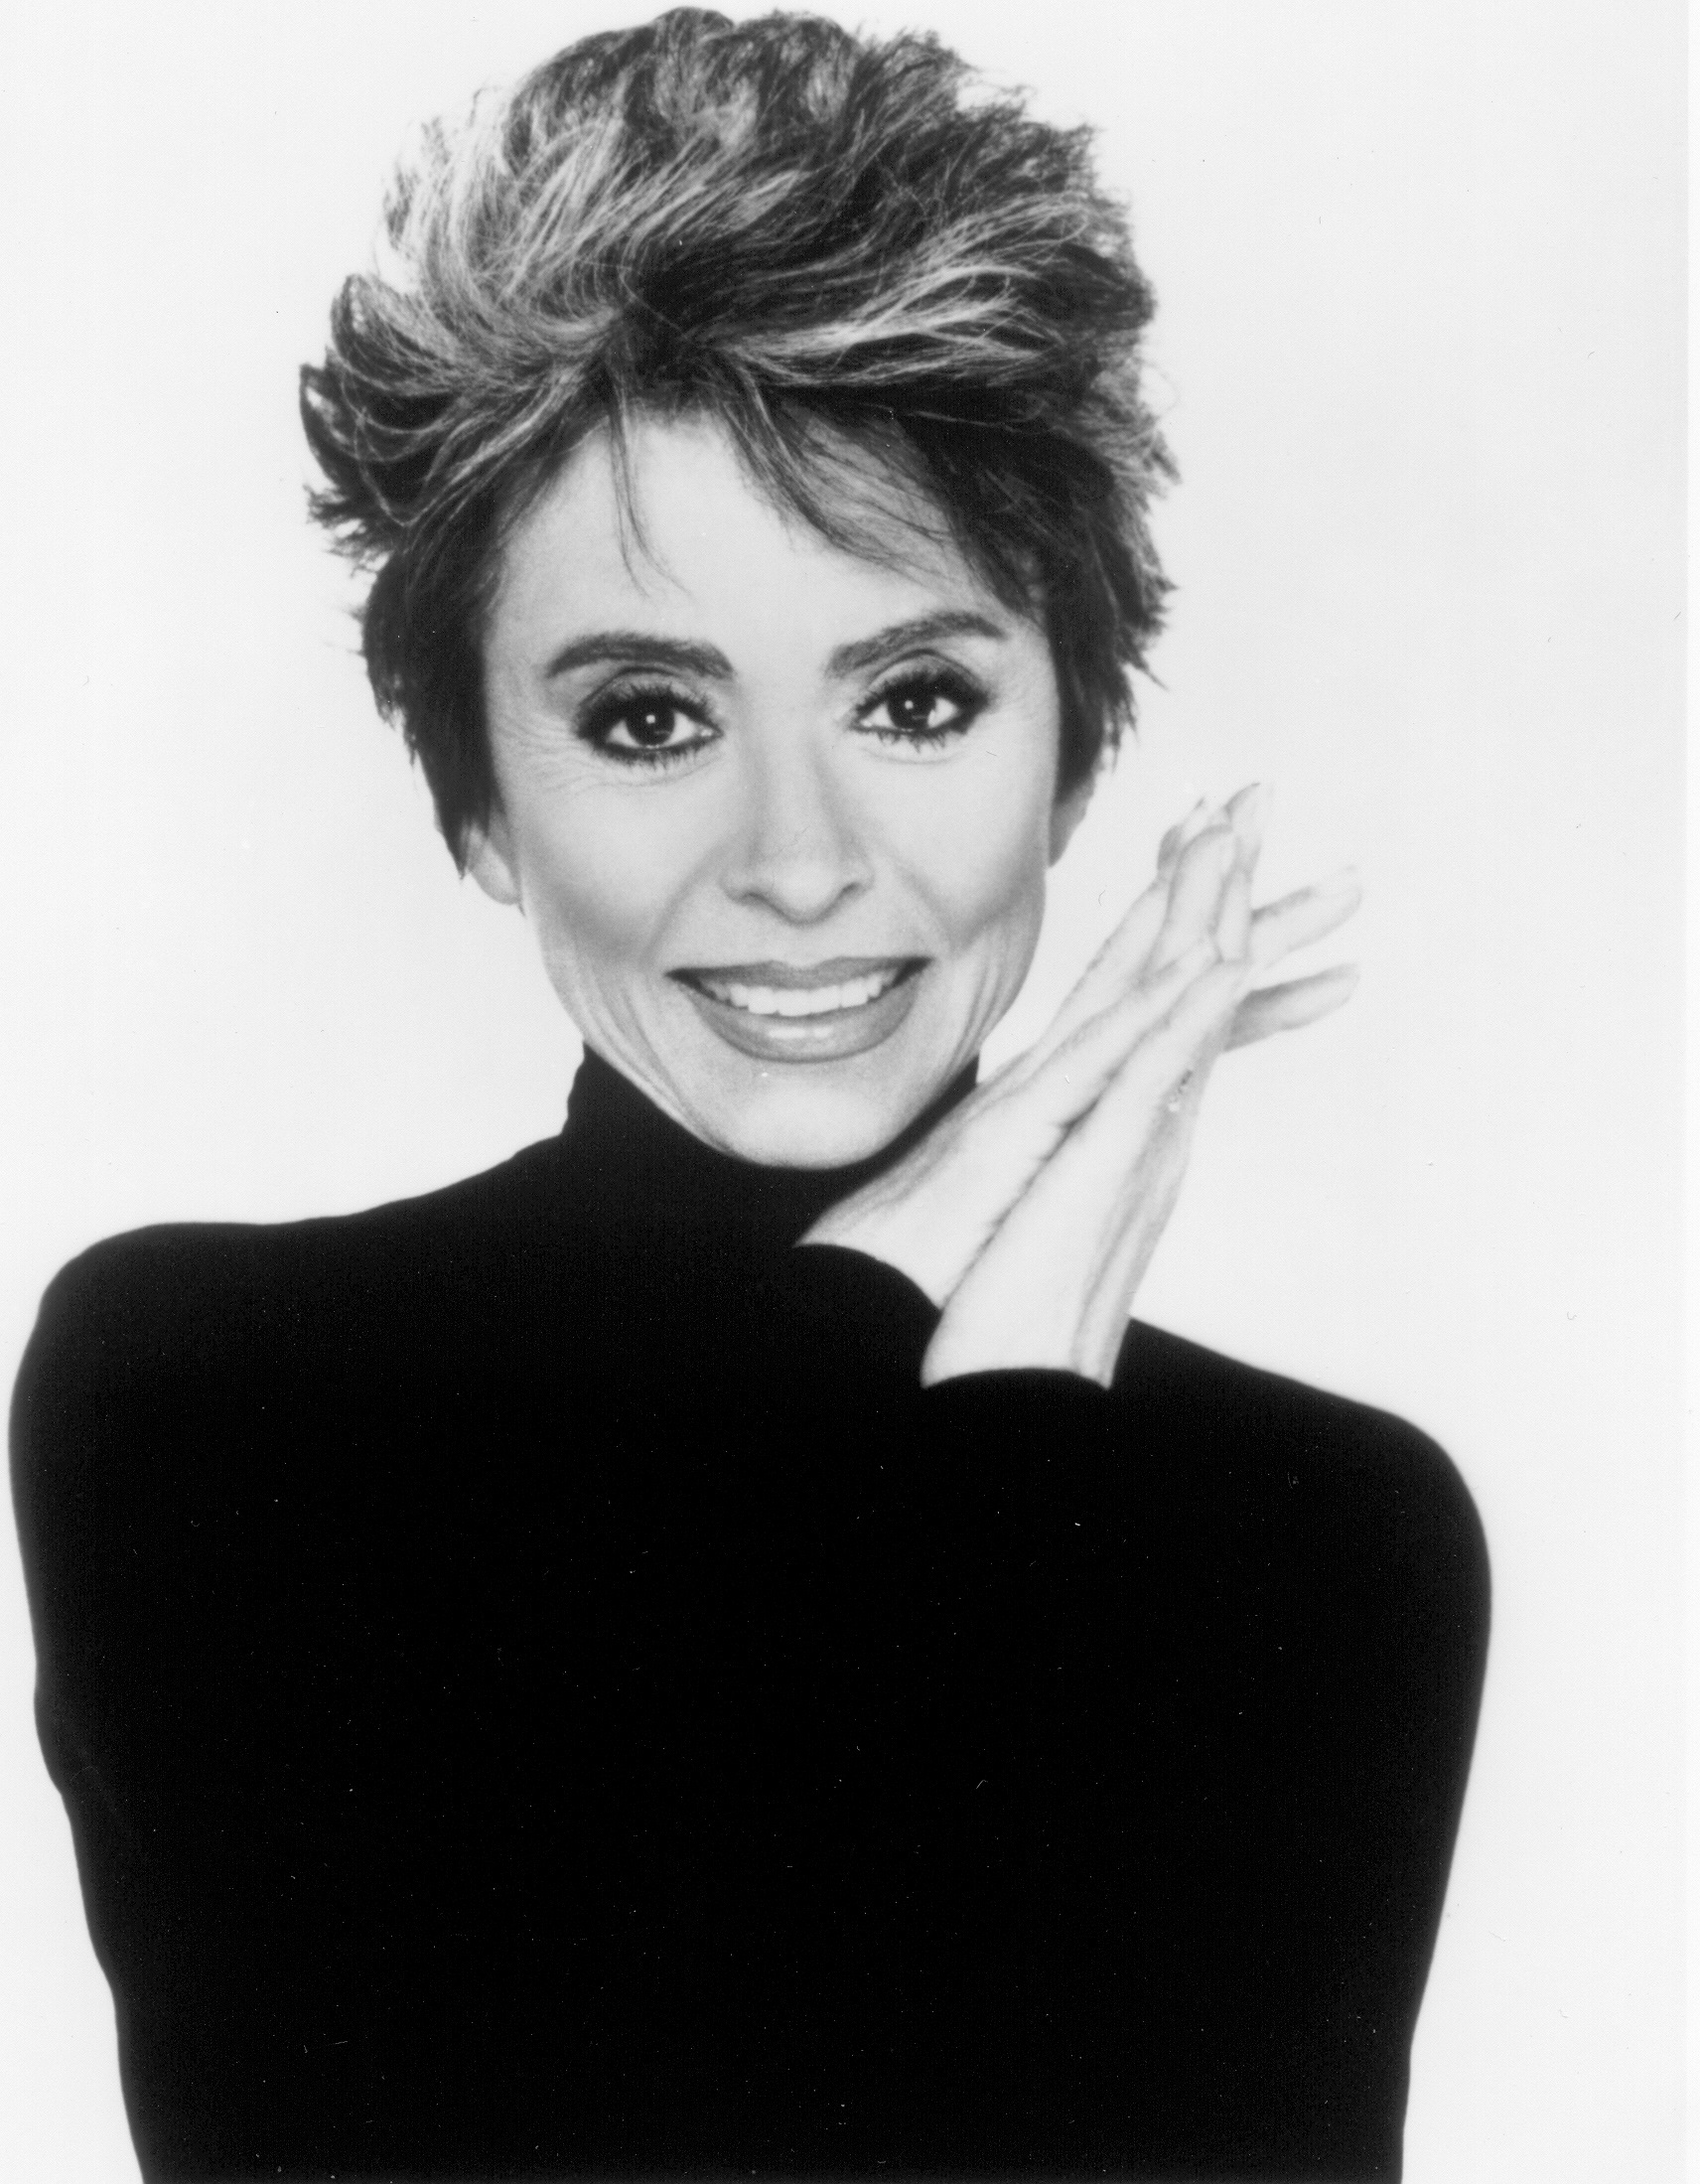 Headshot of a smiling Rita Moreno with hands folded at her face.